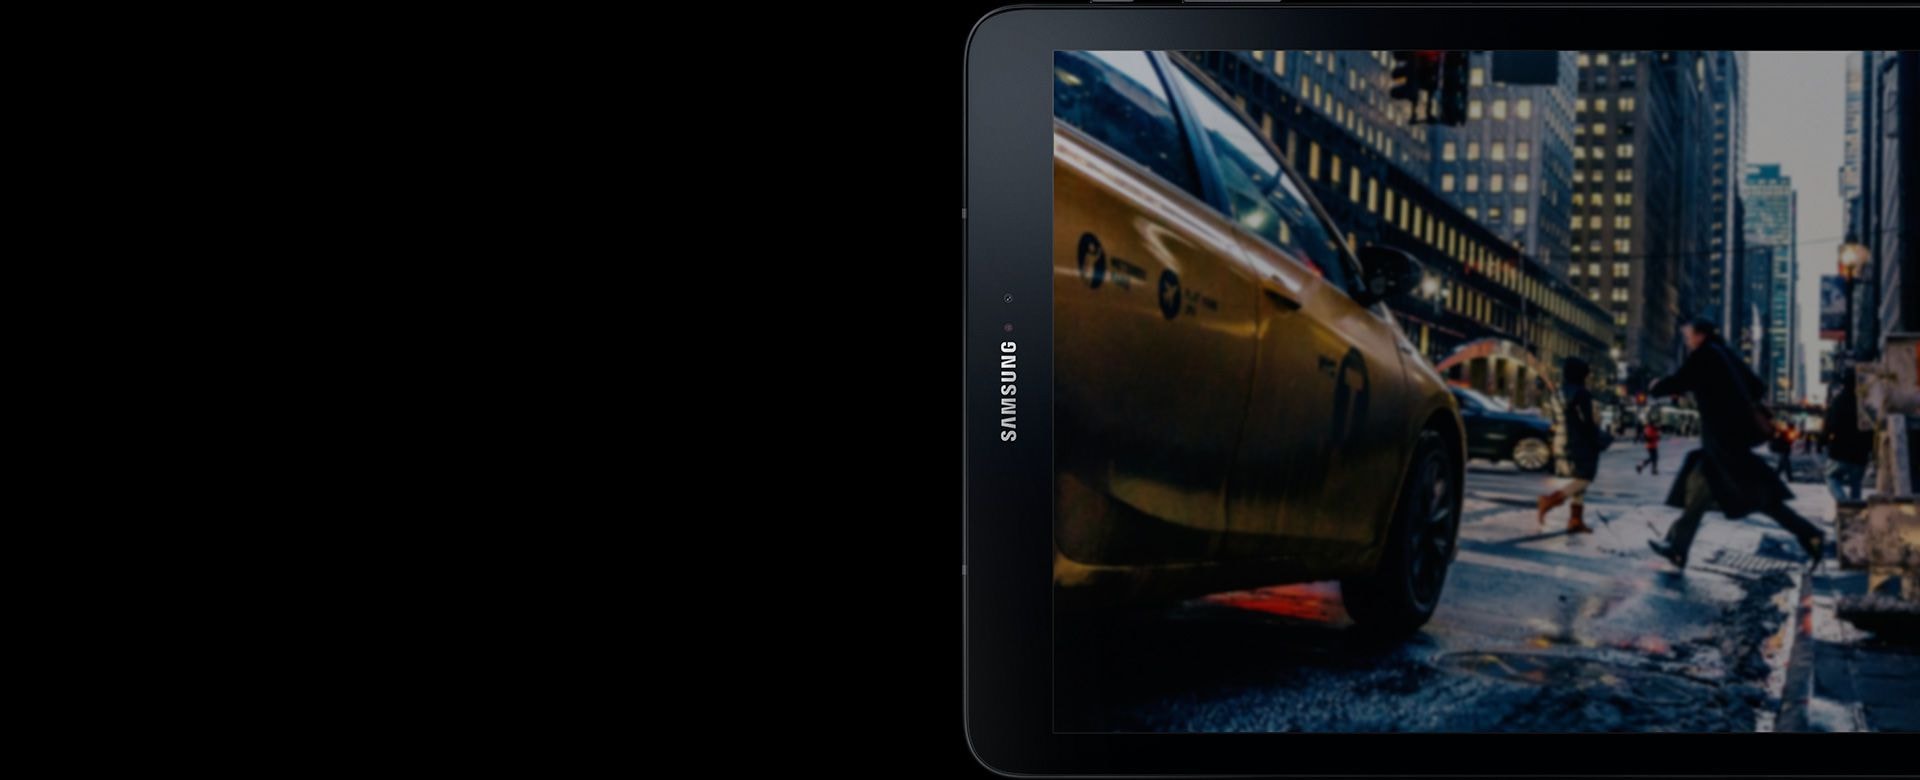 Galaxy Tab S3 standing sideways with image of a yellow cab downtown